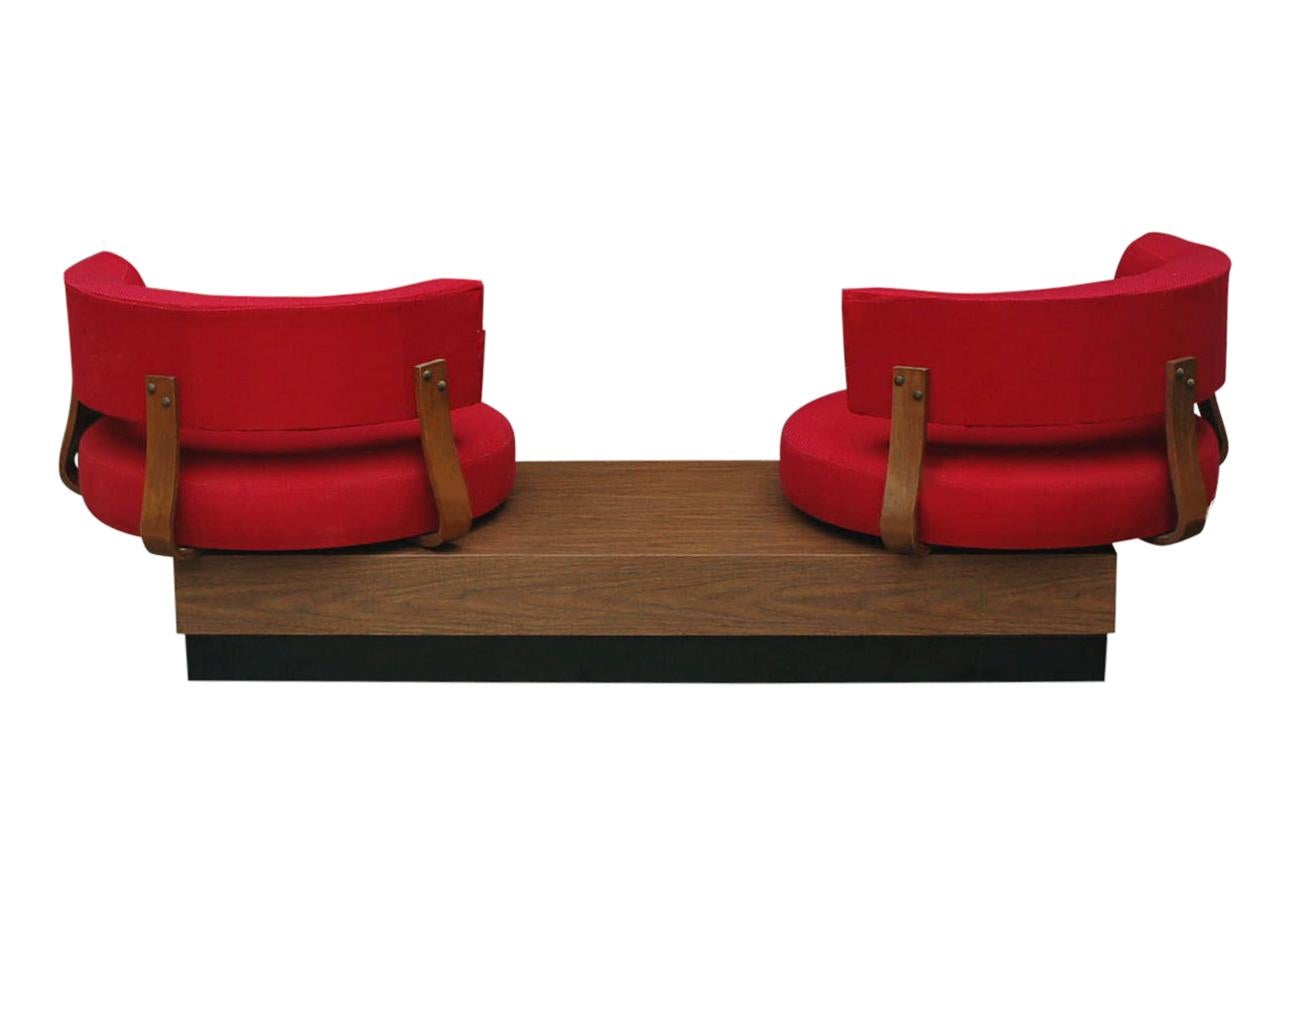 Late 20th Century Unique Mid-Century Modern Red Swivel Lounge Chairs Sofa on Platform Base